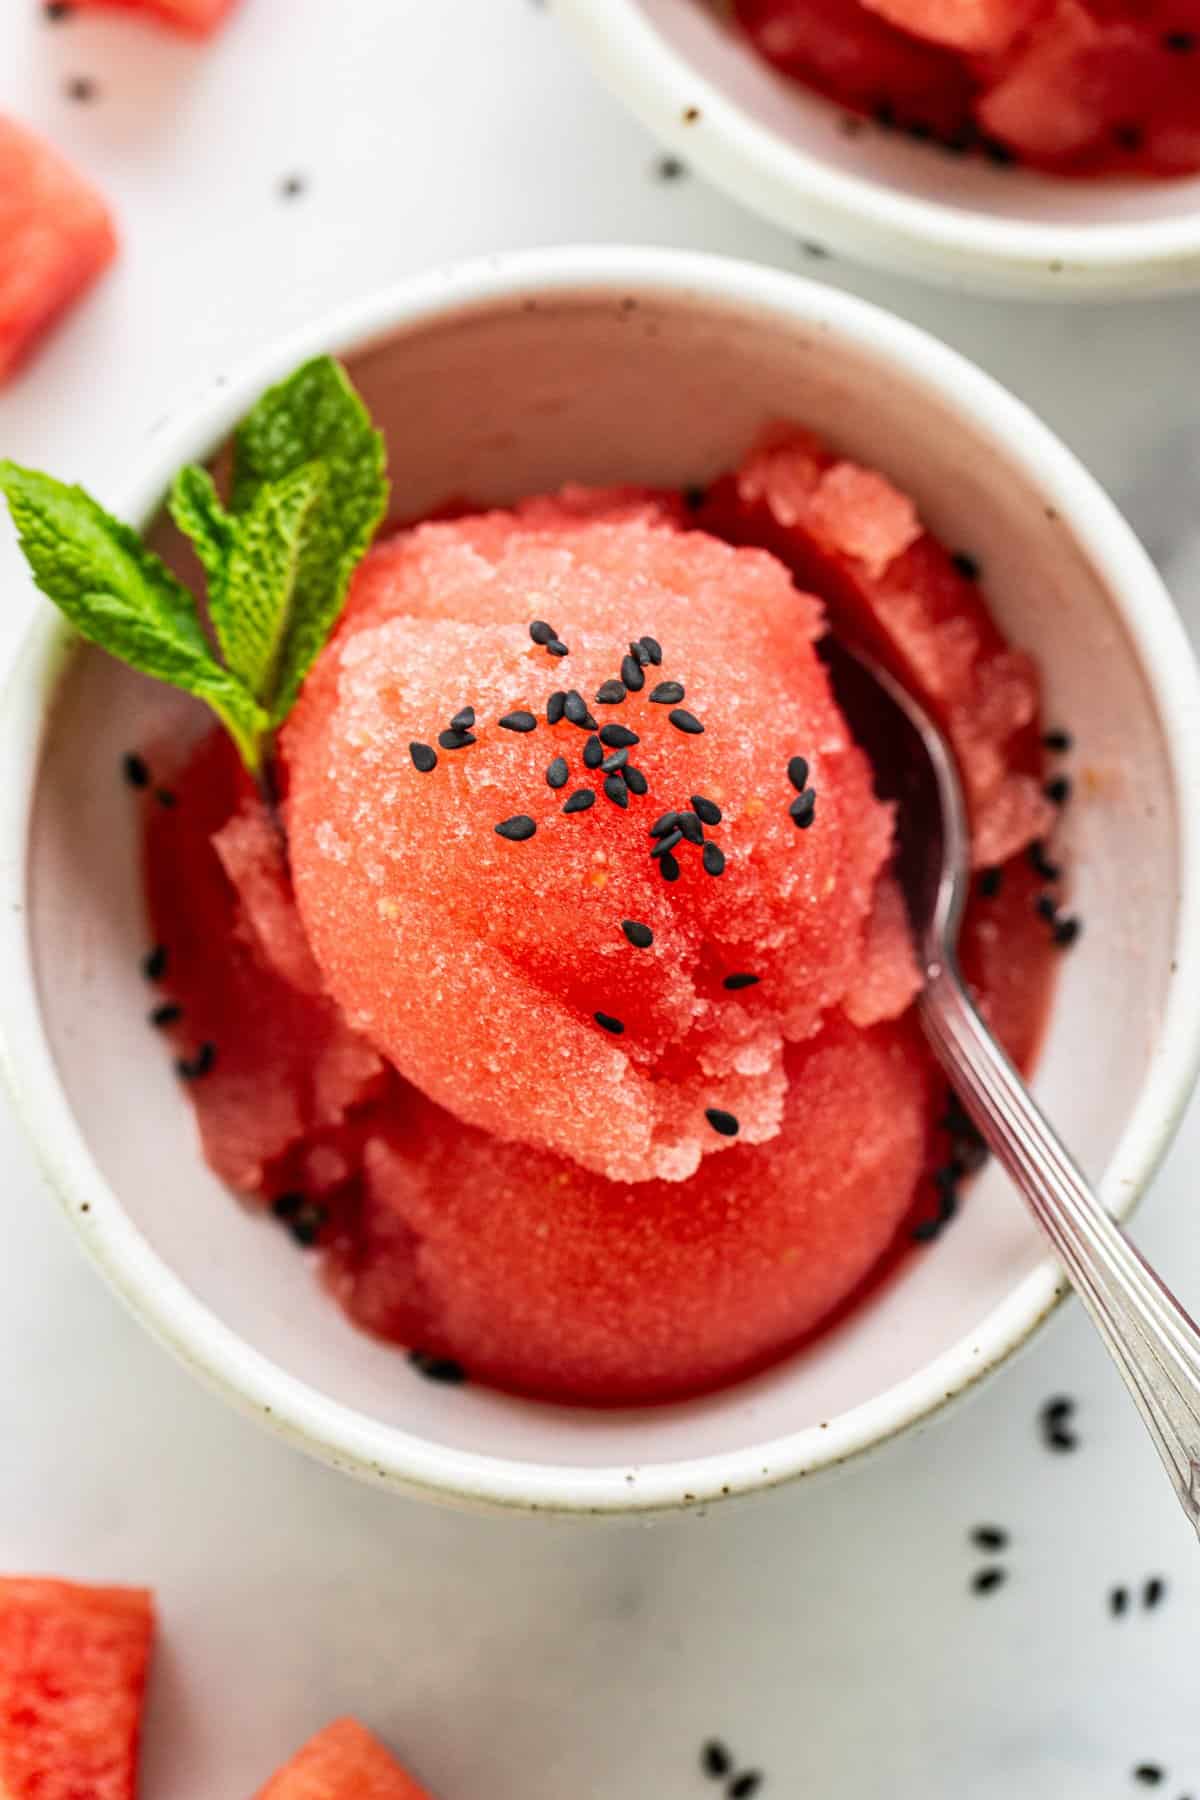 A bowl of watermelon sorbet garnished with mint leaves and black sesame seeds, accompanied by a s،, on a light surface.